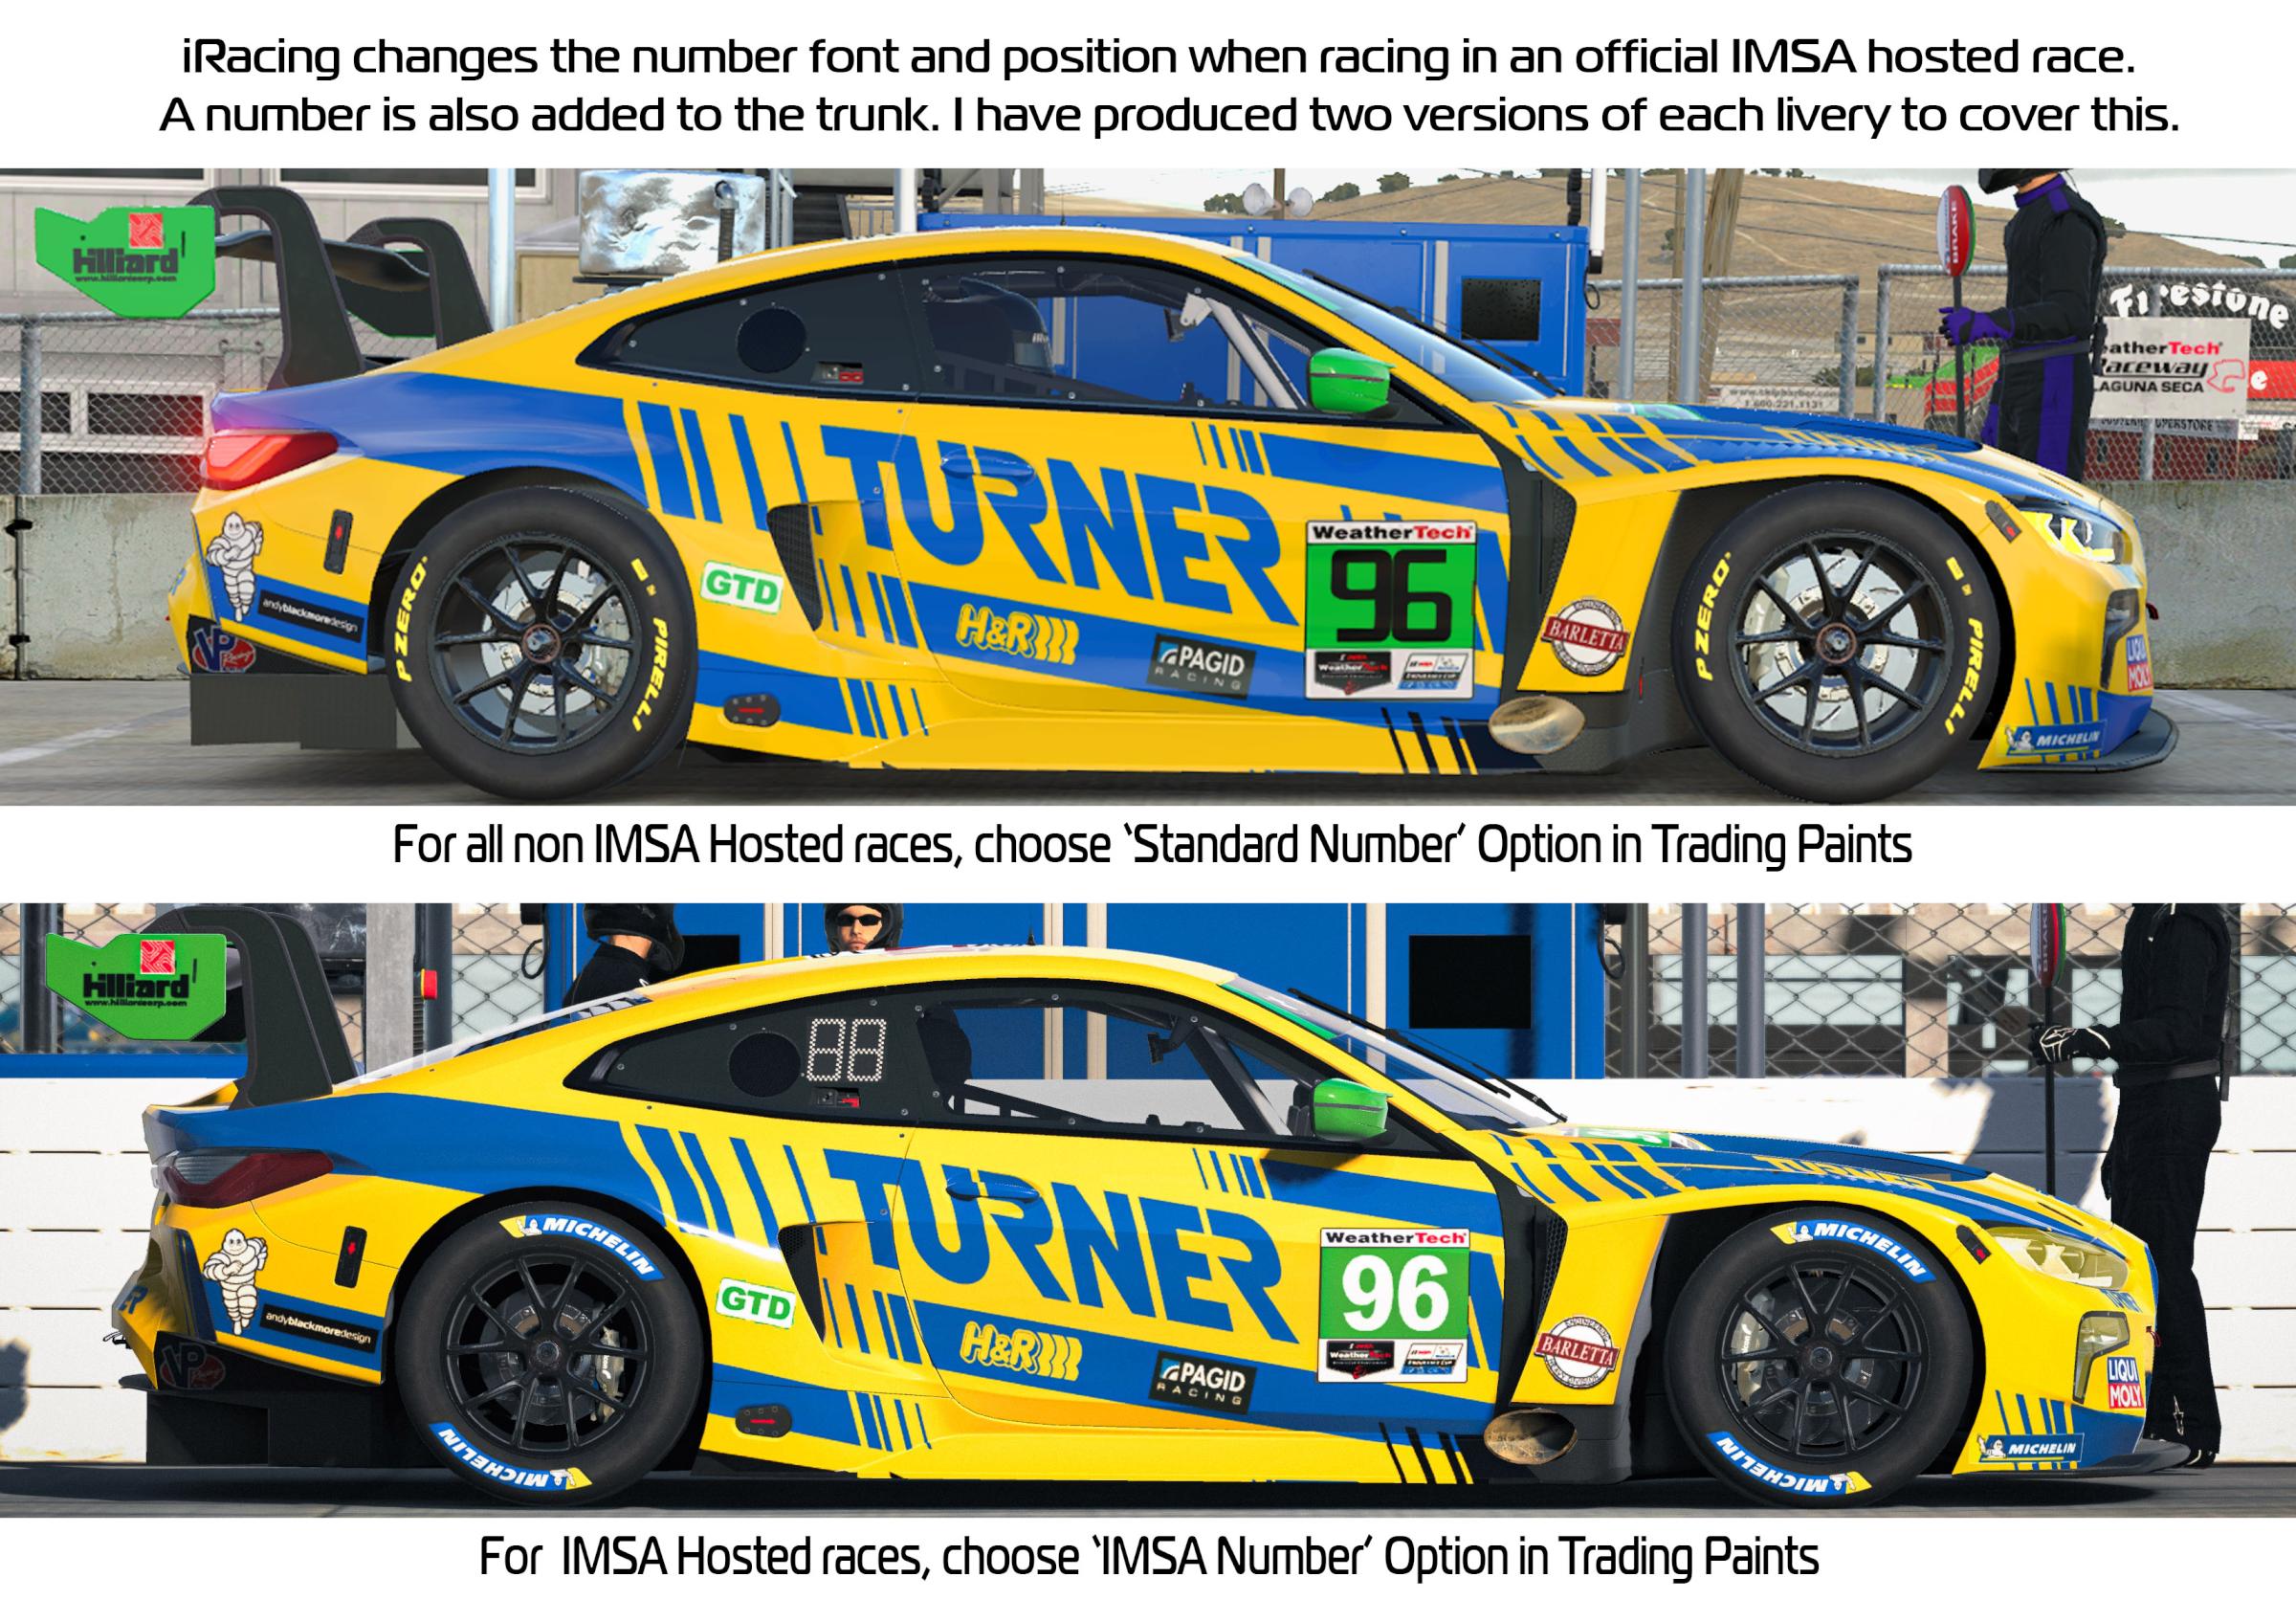 Preview of 2022 Turner Motorsport BMW M4 GT3 (Liqui Moly. IMSA Sessions Number) by Andrew Blackmore